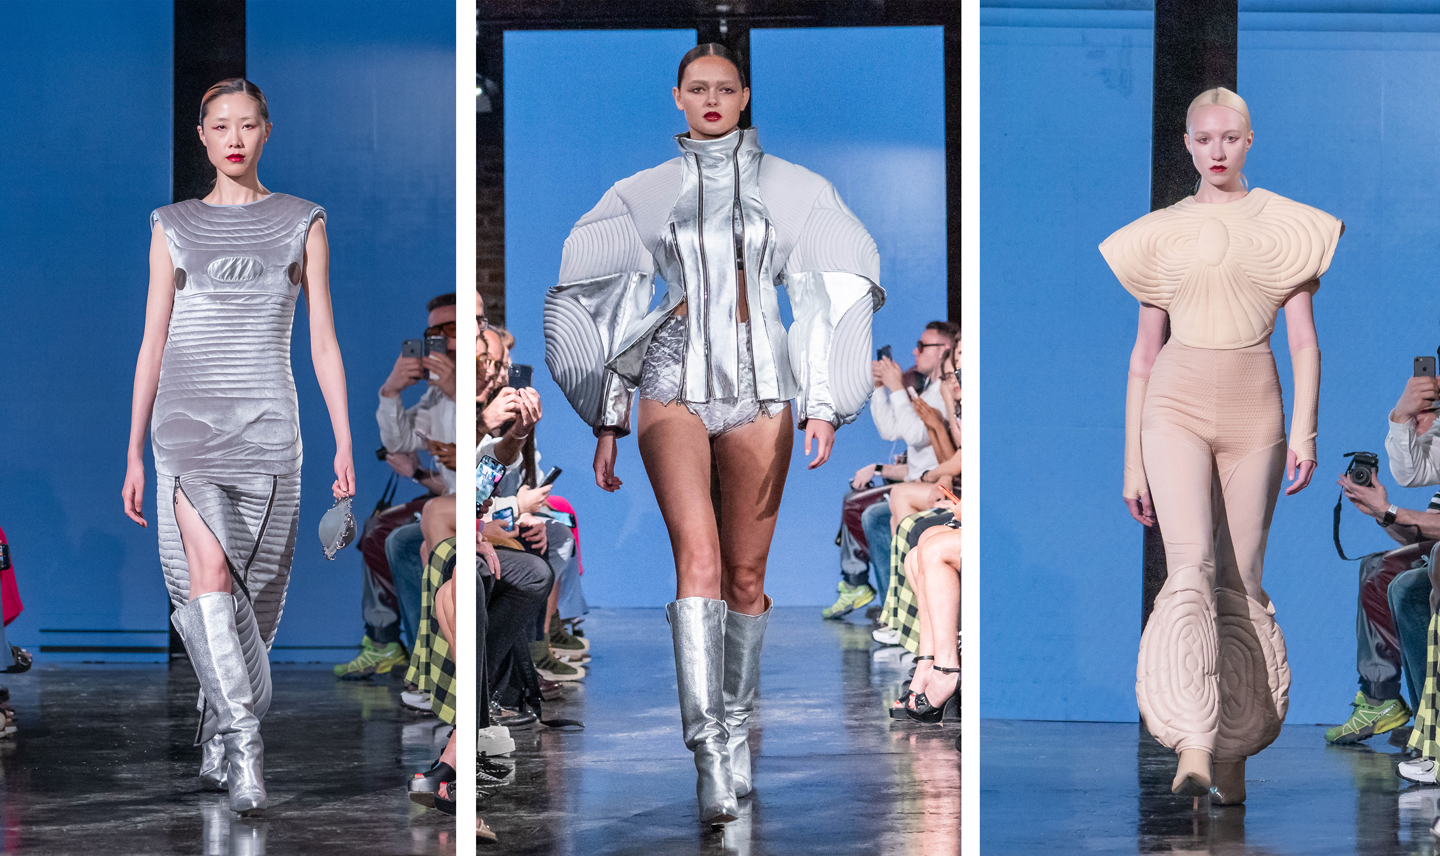 Grazioli's collection took inspiration from conspiracy theories surrounding extra-terrestrial phenomena from Area 51